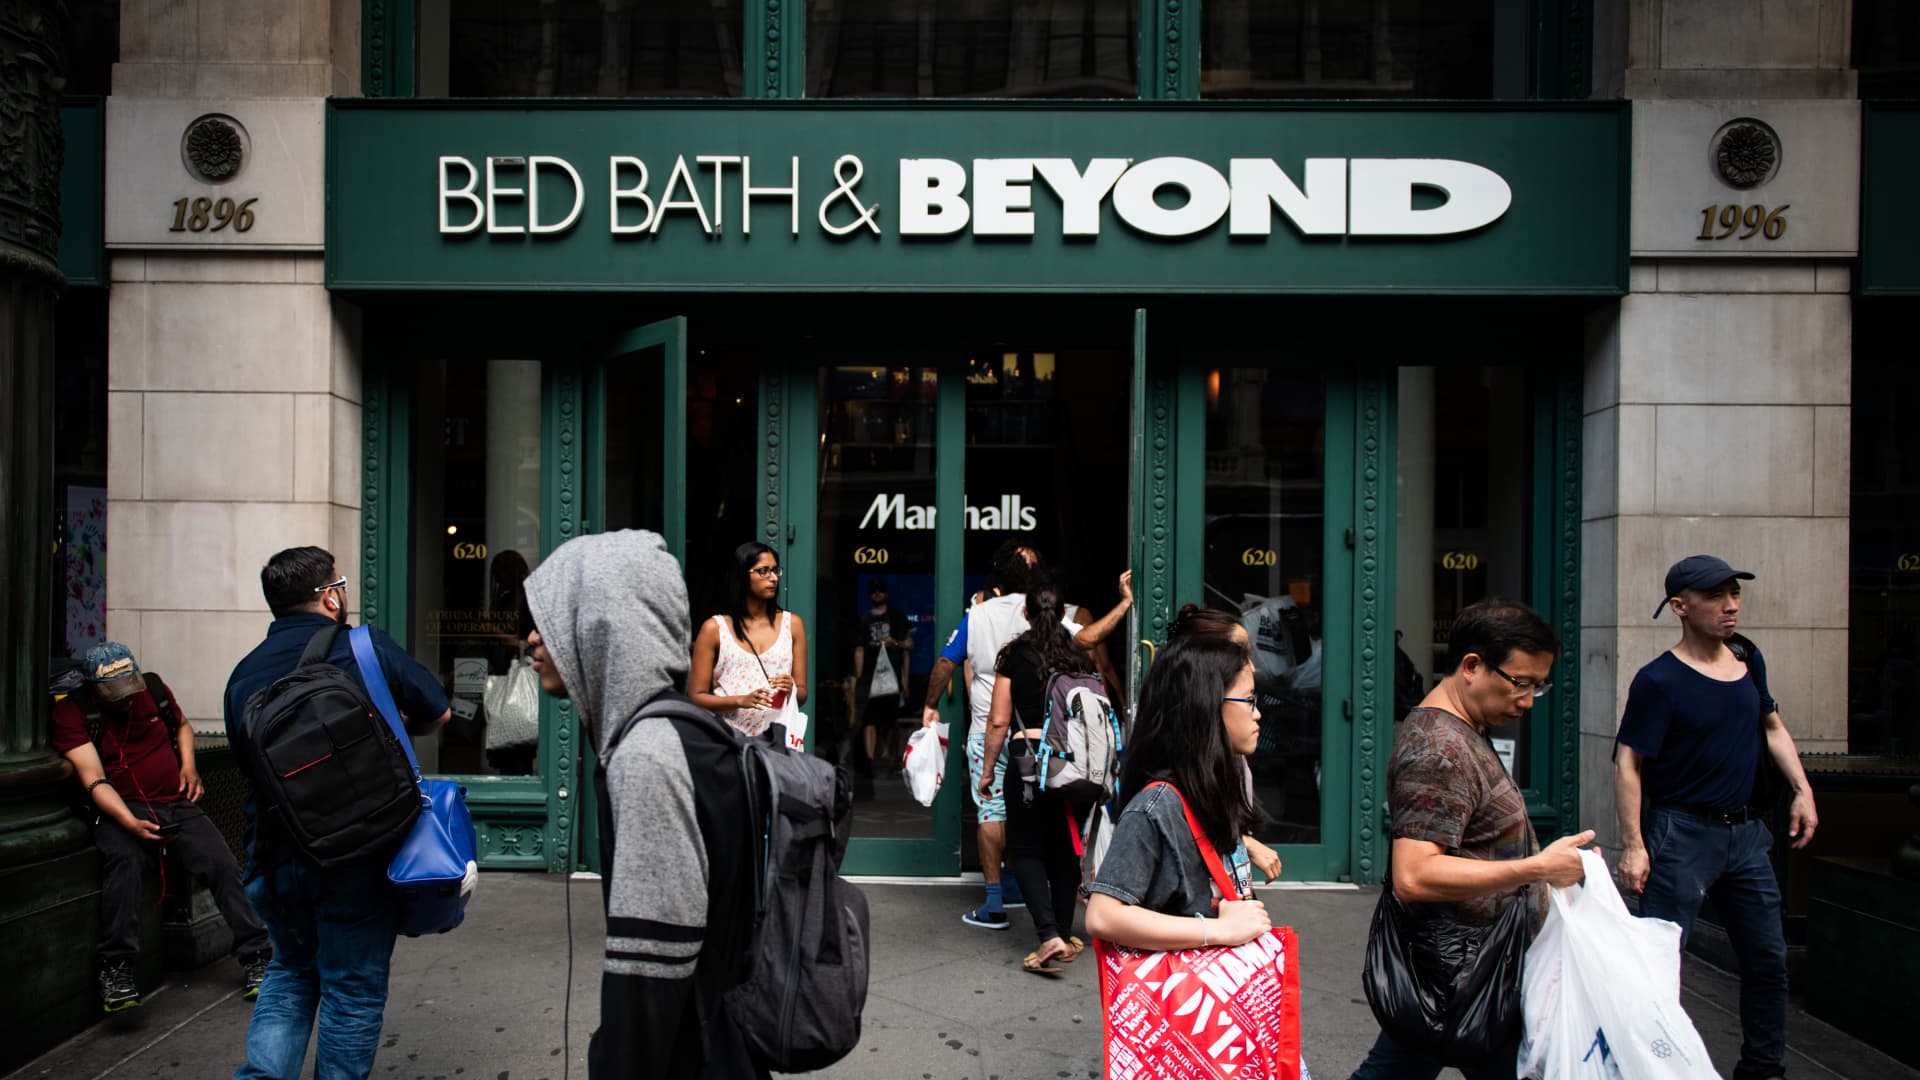 Stocks making the biggest moves midday: Bed Bath & Beyond, Tesla, Expedia and more